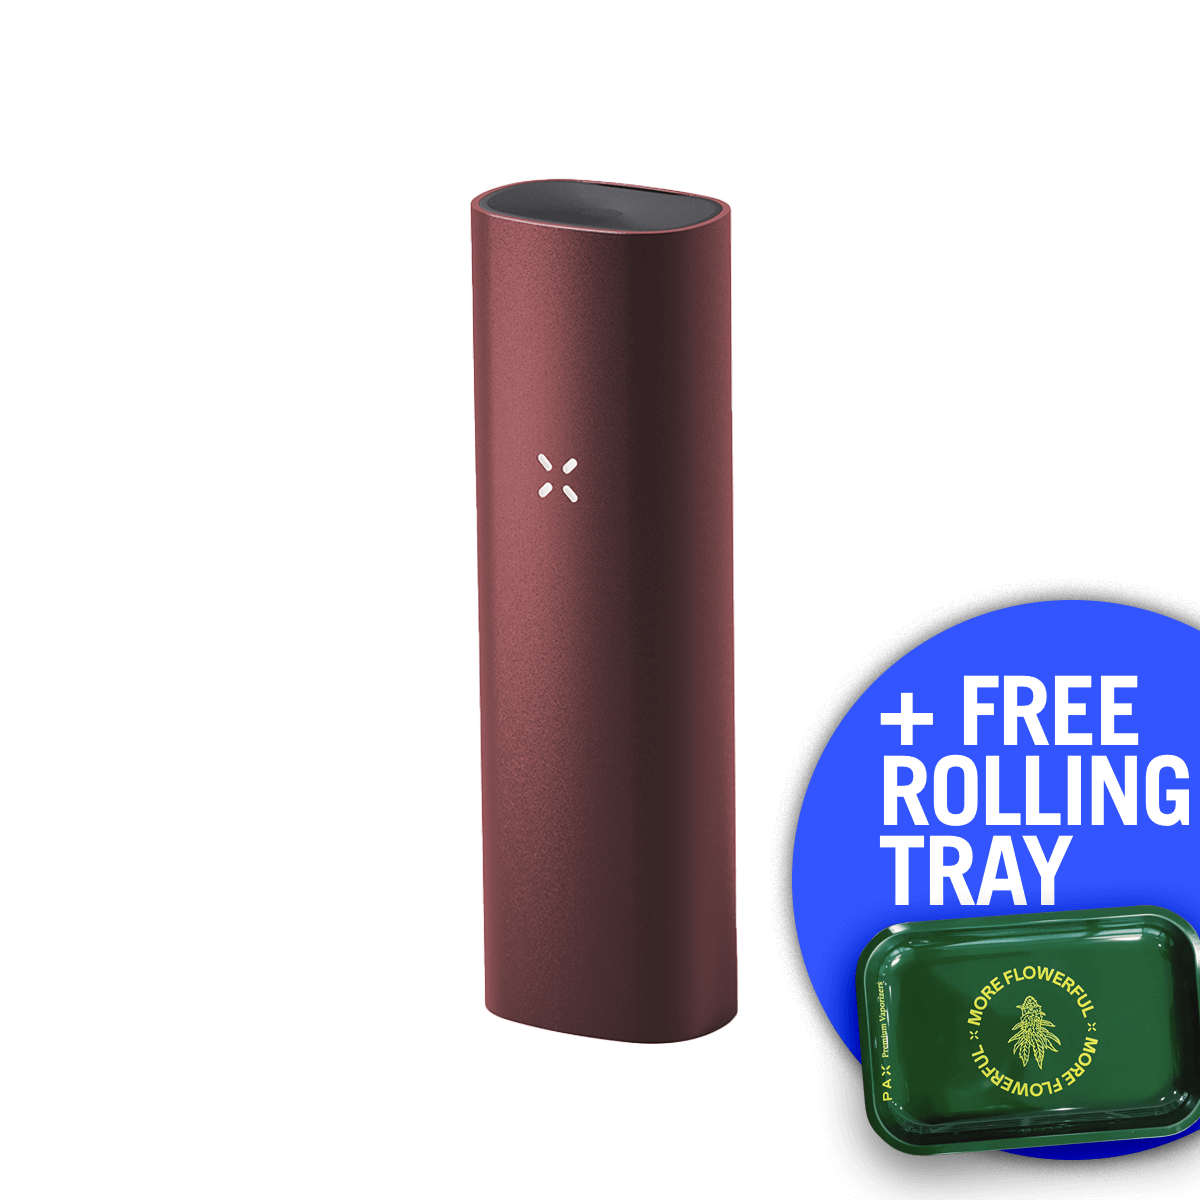 PAX 3 - Device Only